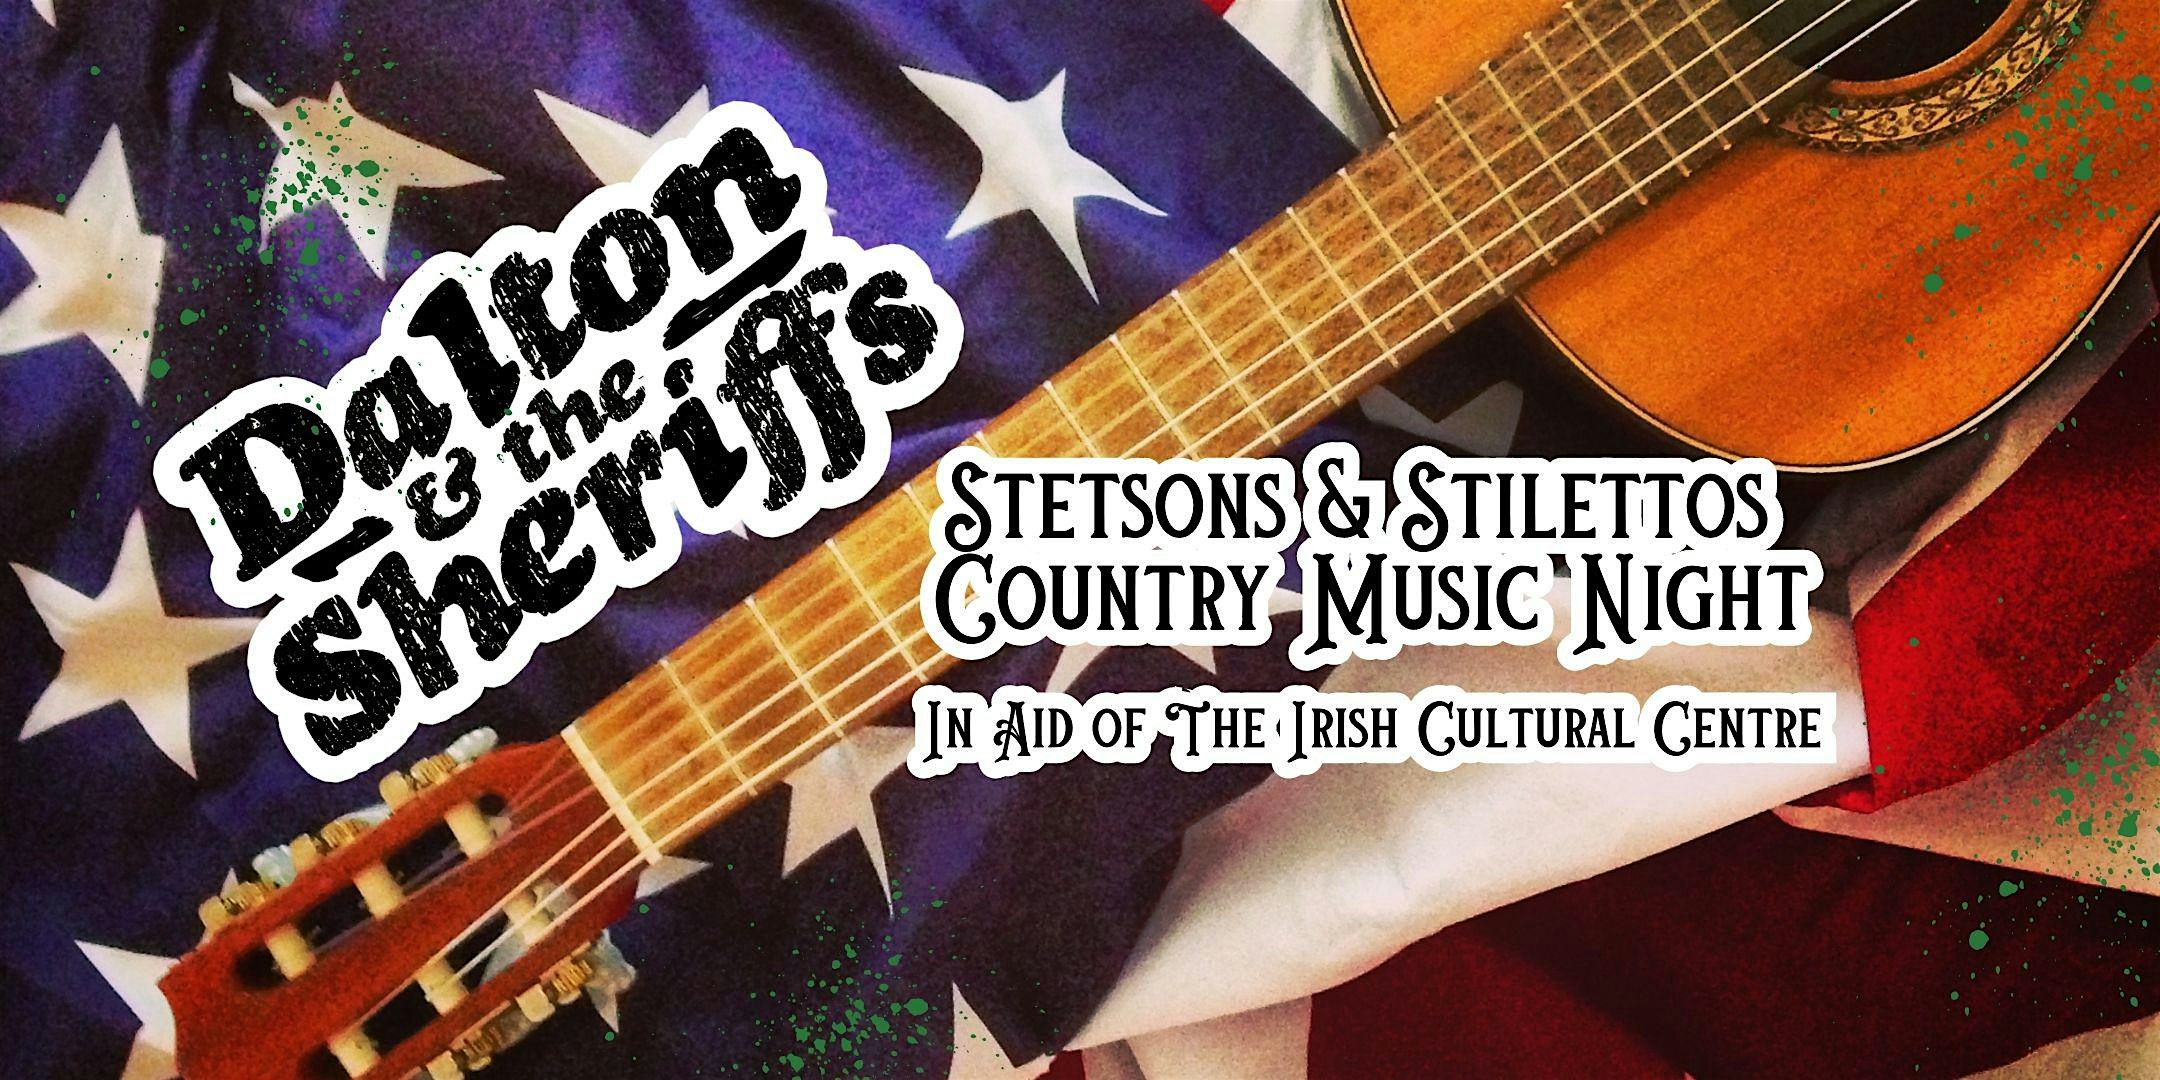 Dalton & The Sheriffs – ‘Stetsons And Stilettos’ ICC Country Music Night!